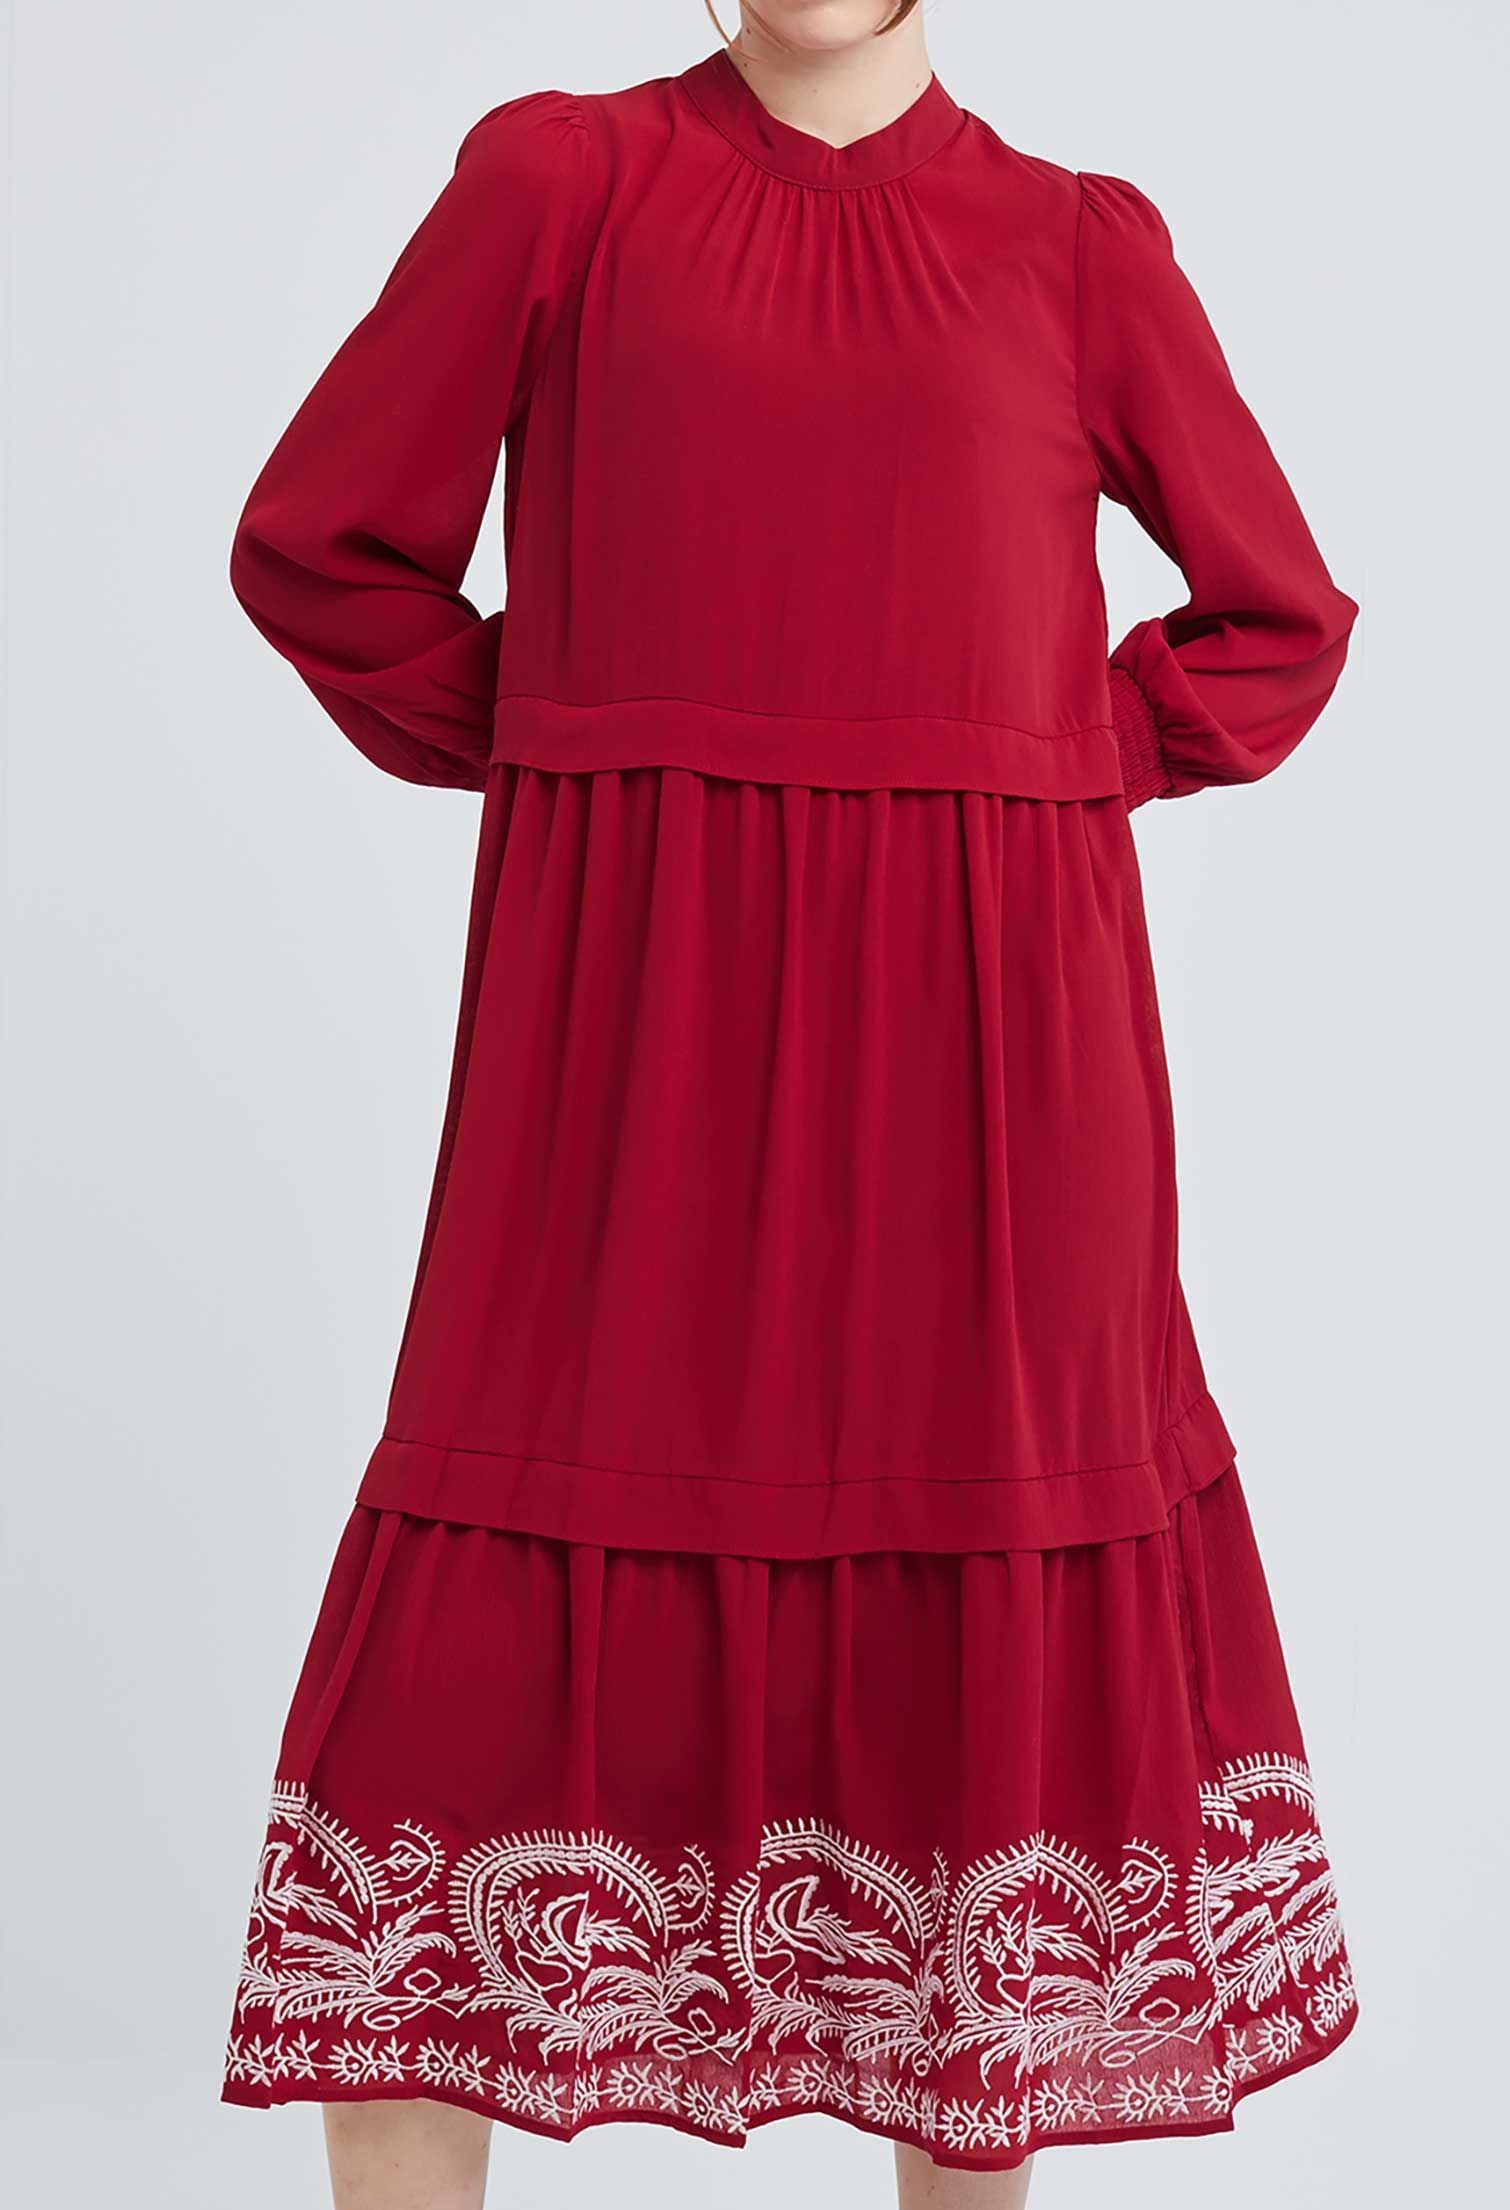 Contrast Embroidered Swing Dress